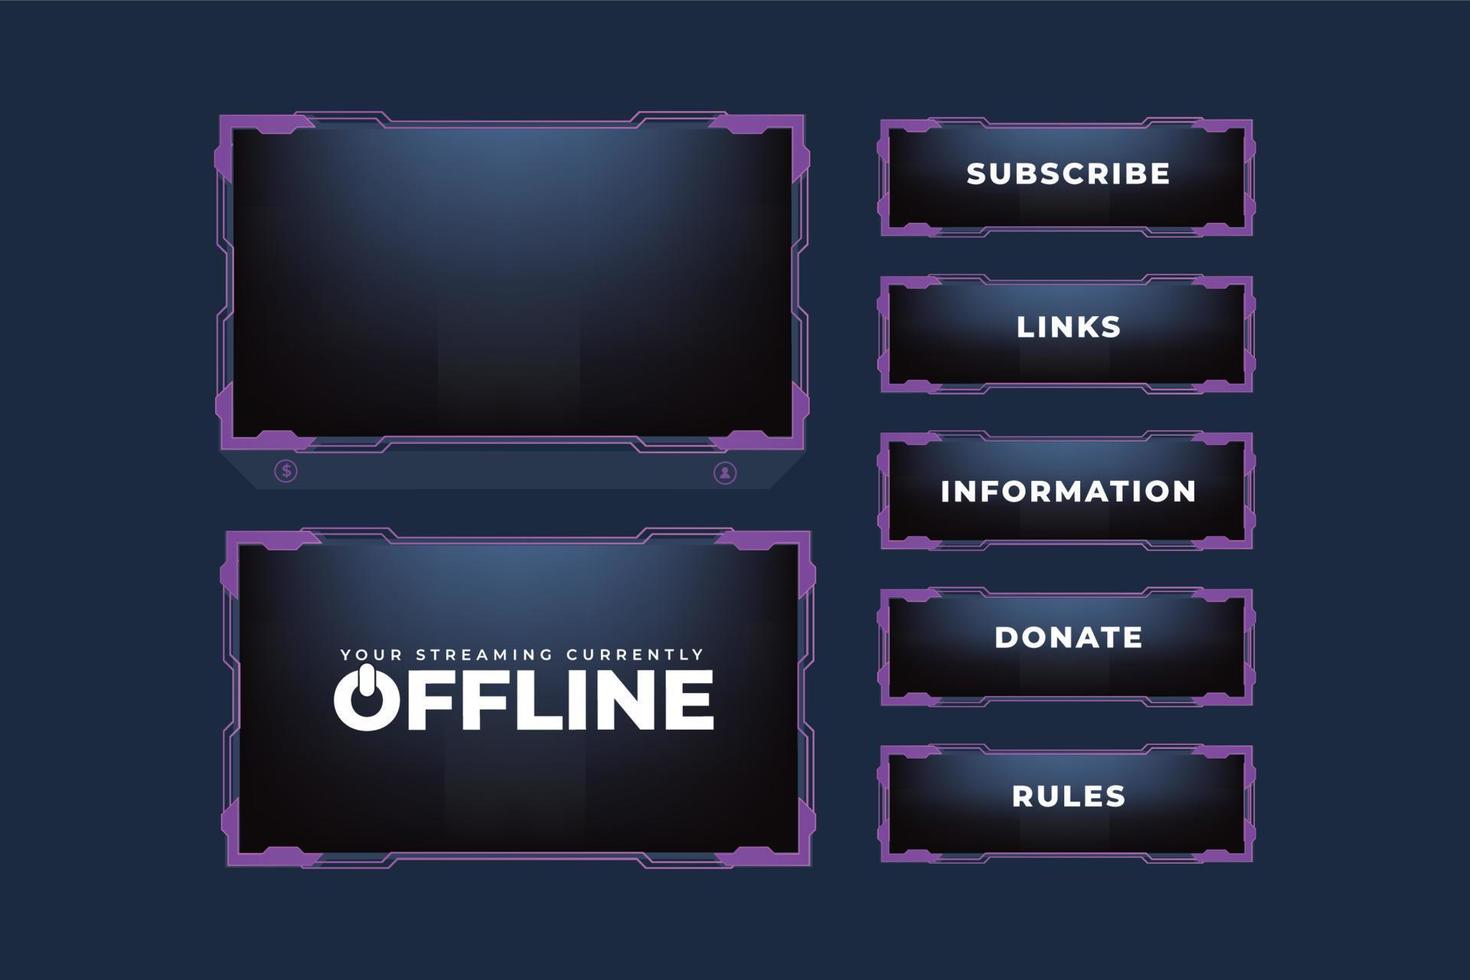 Futuristic gamer screen interface decoration with abstract shapes and purple colors. Modern live-streaming border frame design with subscribe buttons. Special gaming overlay frame vector. vector